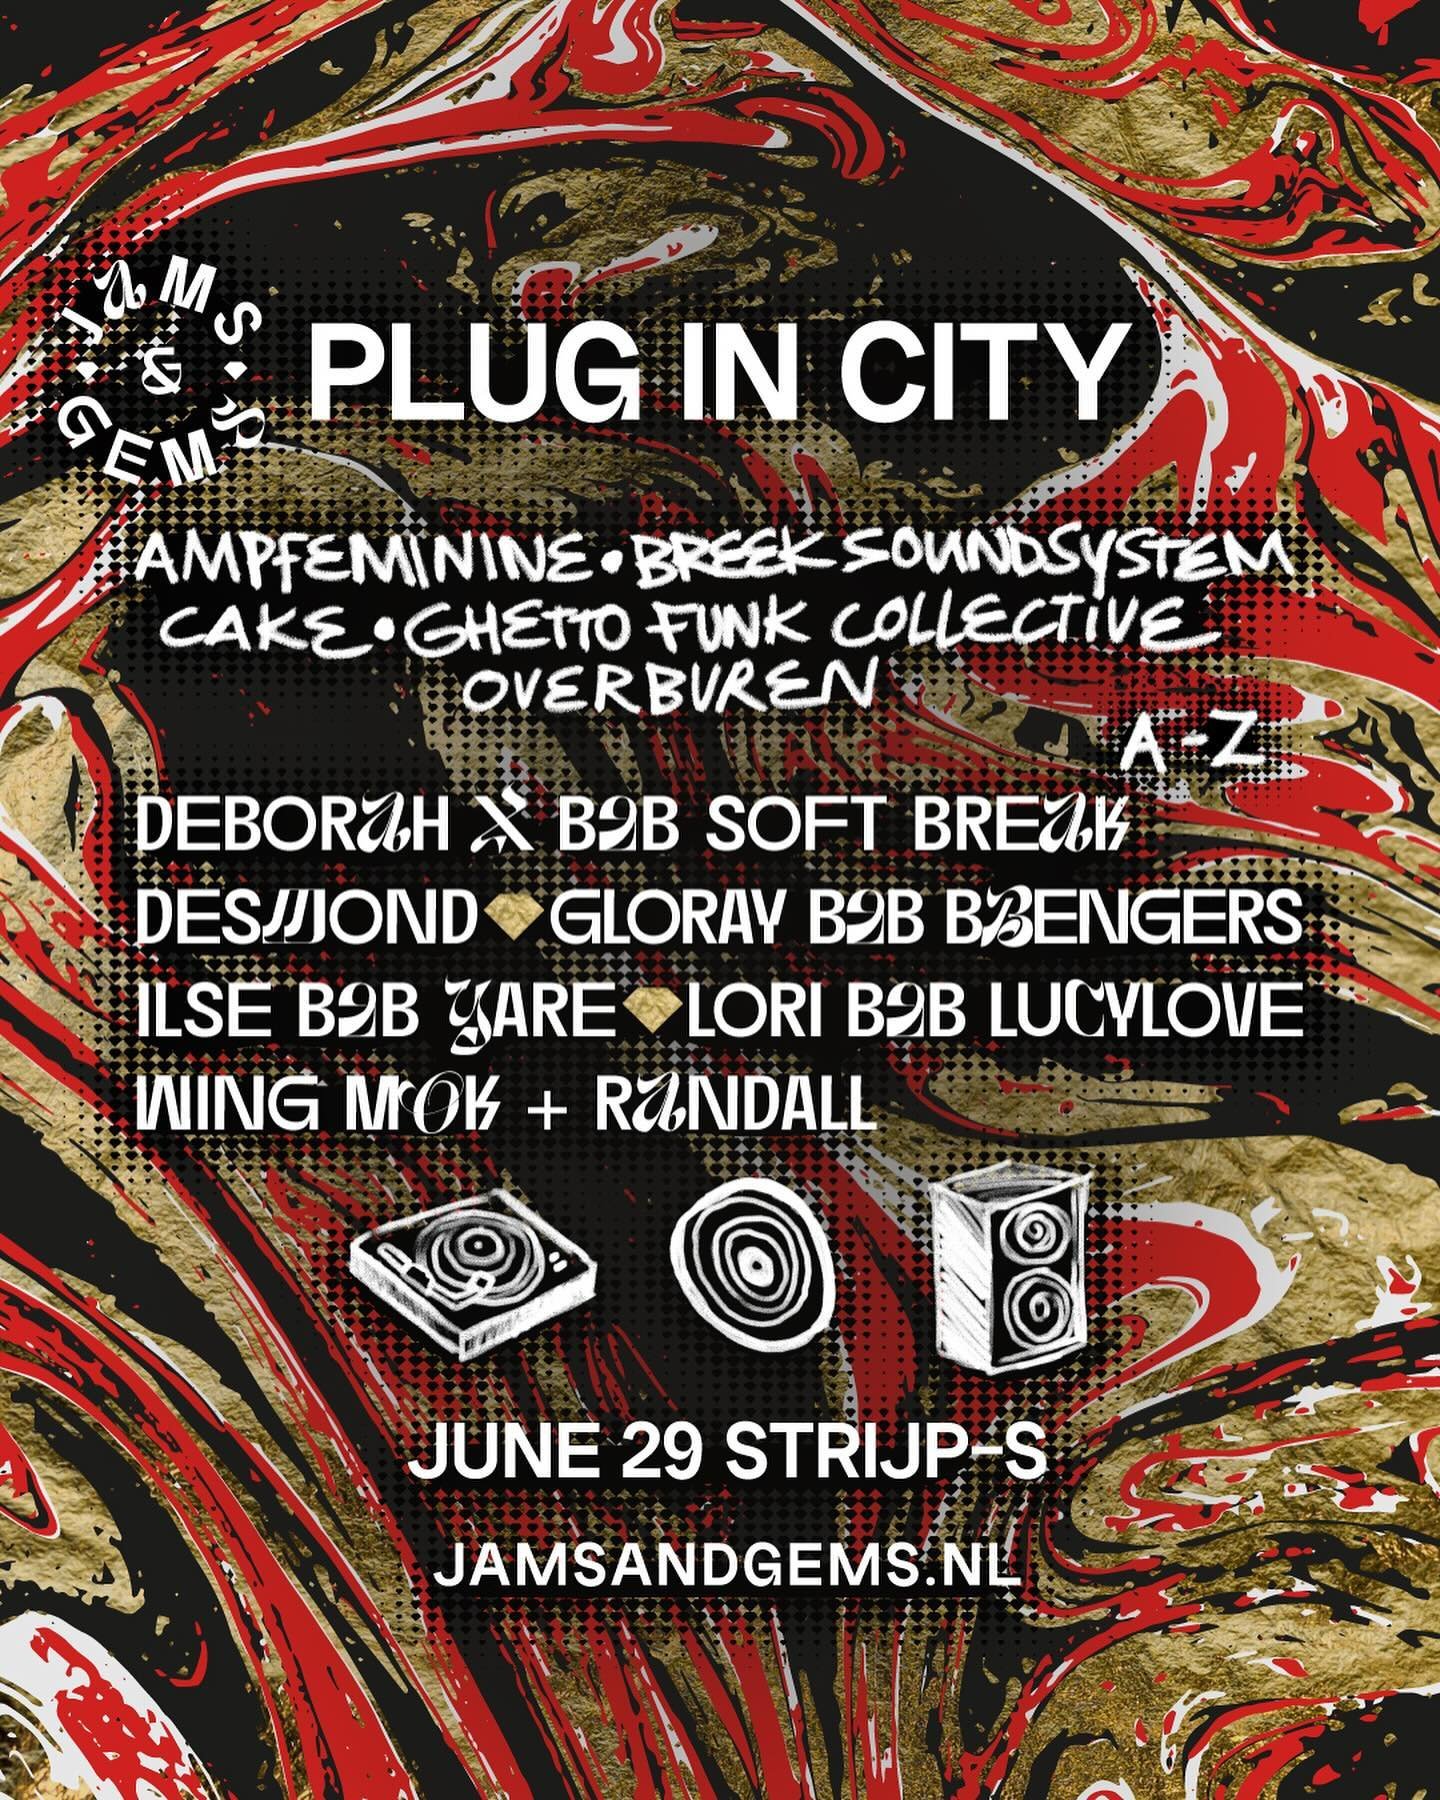 💎We&rsquo;re turning @plugincity into a mine! If you&rsquo;re in need of a dance, that&rsquo;s where you&rsquo;ll be. 

Non-stop DJ sets from outstanding collectives such as:
💥AMPFEMININE 
💥BREEK 
💥CAKE 
💥GHETTO FUNK COLLECTIVE 
💥OVERBUREN 

Th